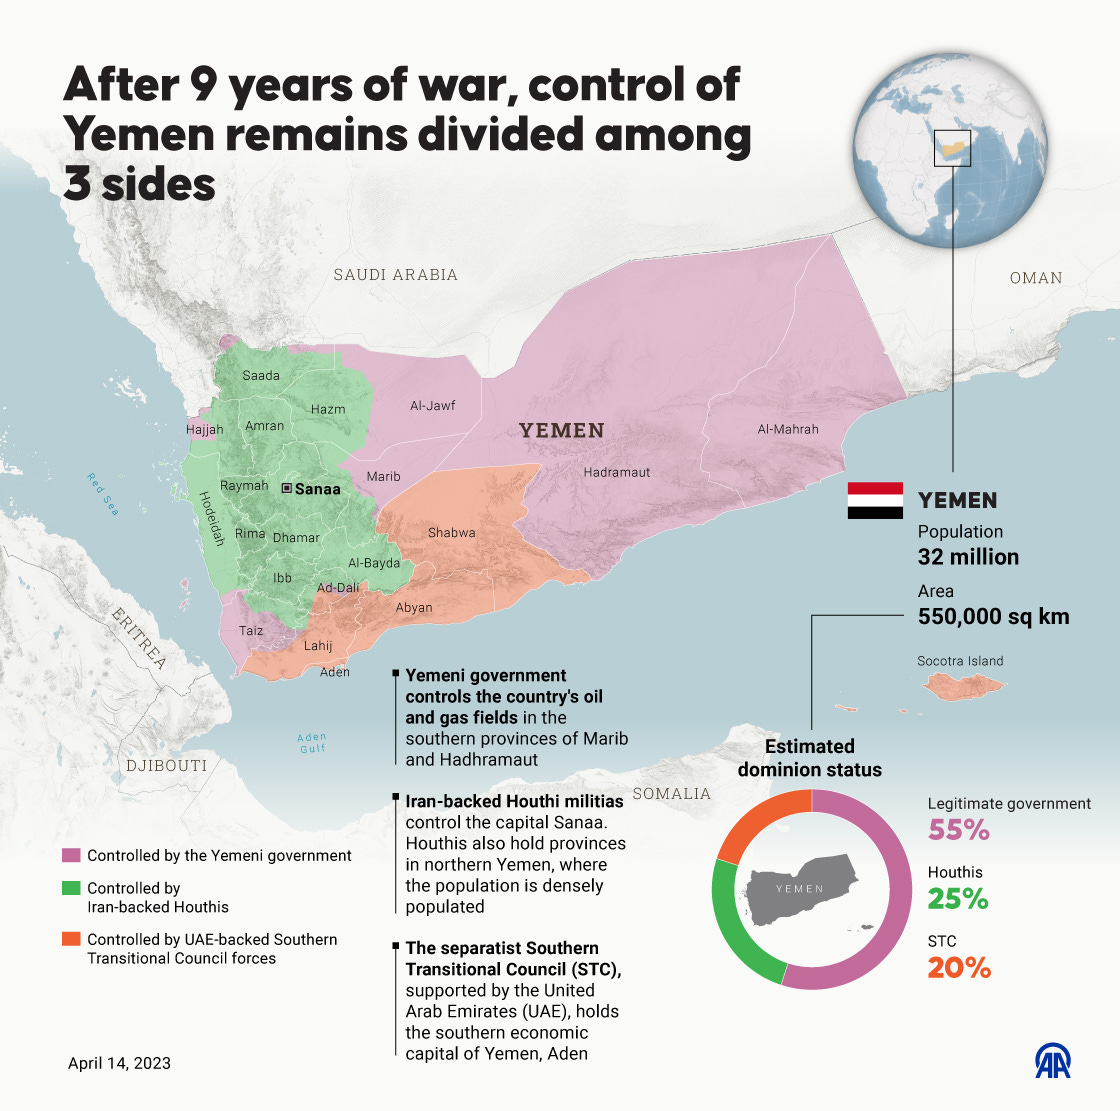 After 9 years of war, control of Yemen remains divided among 3 sides